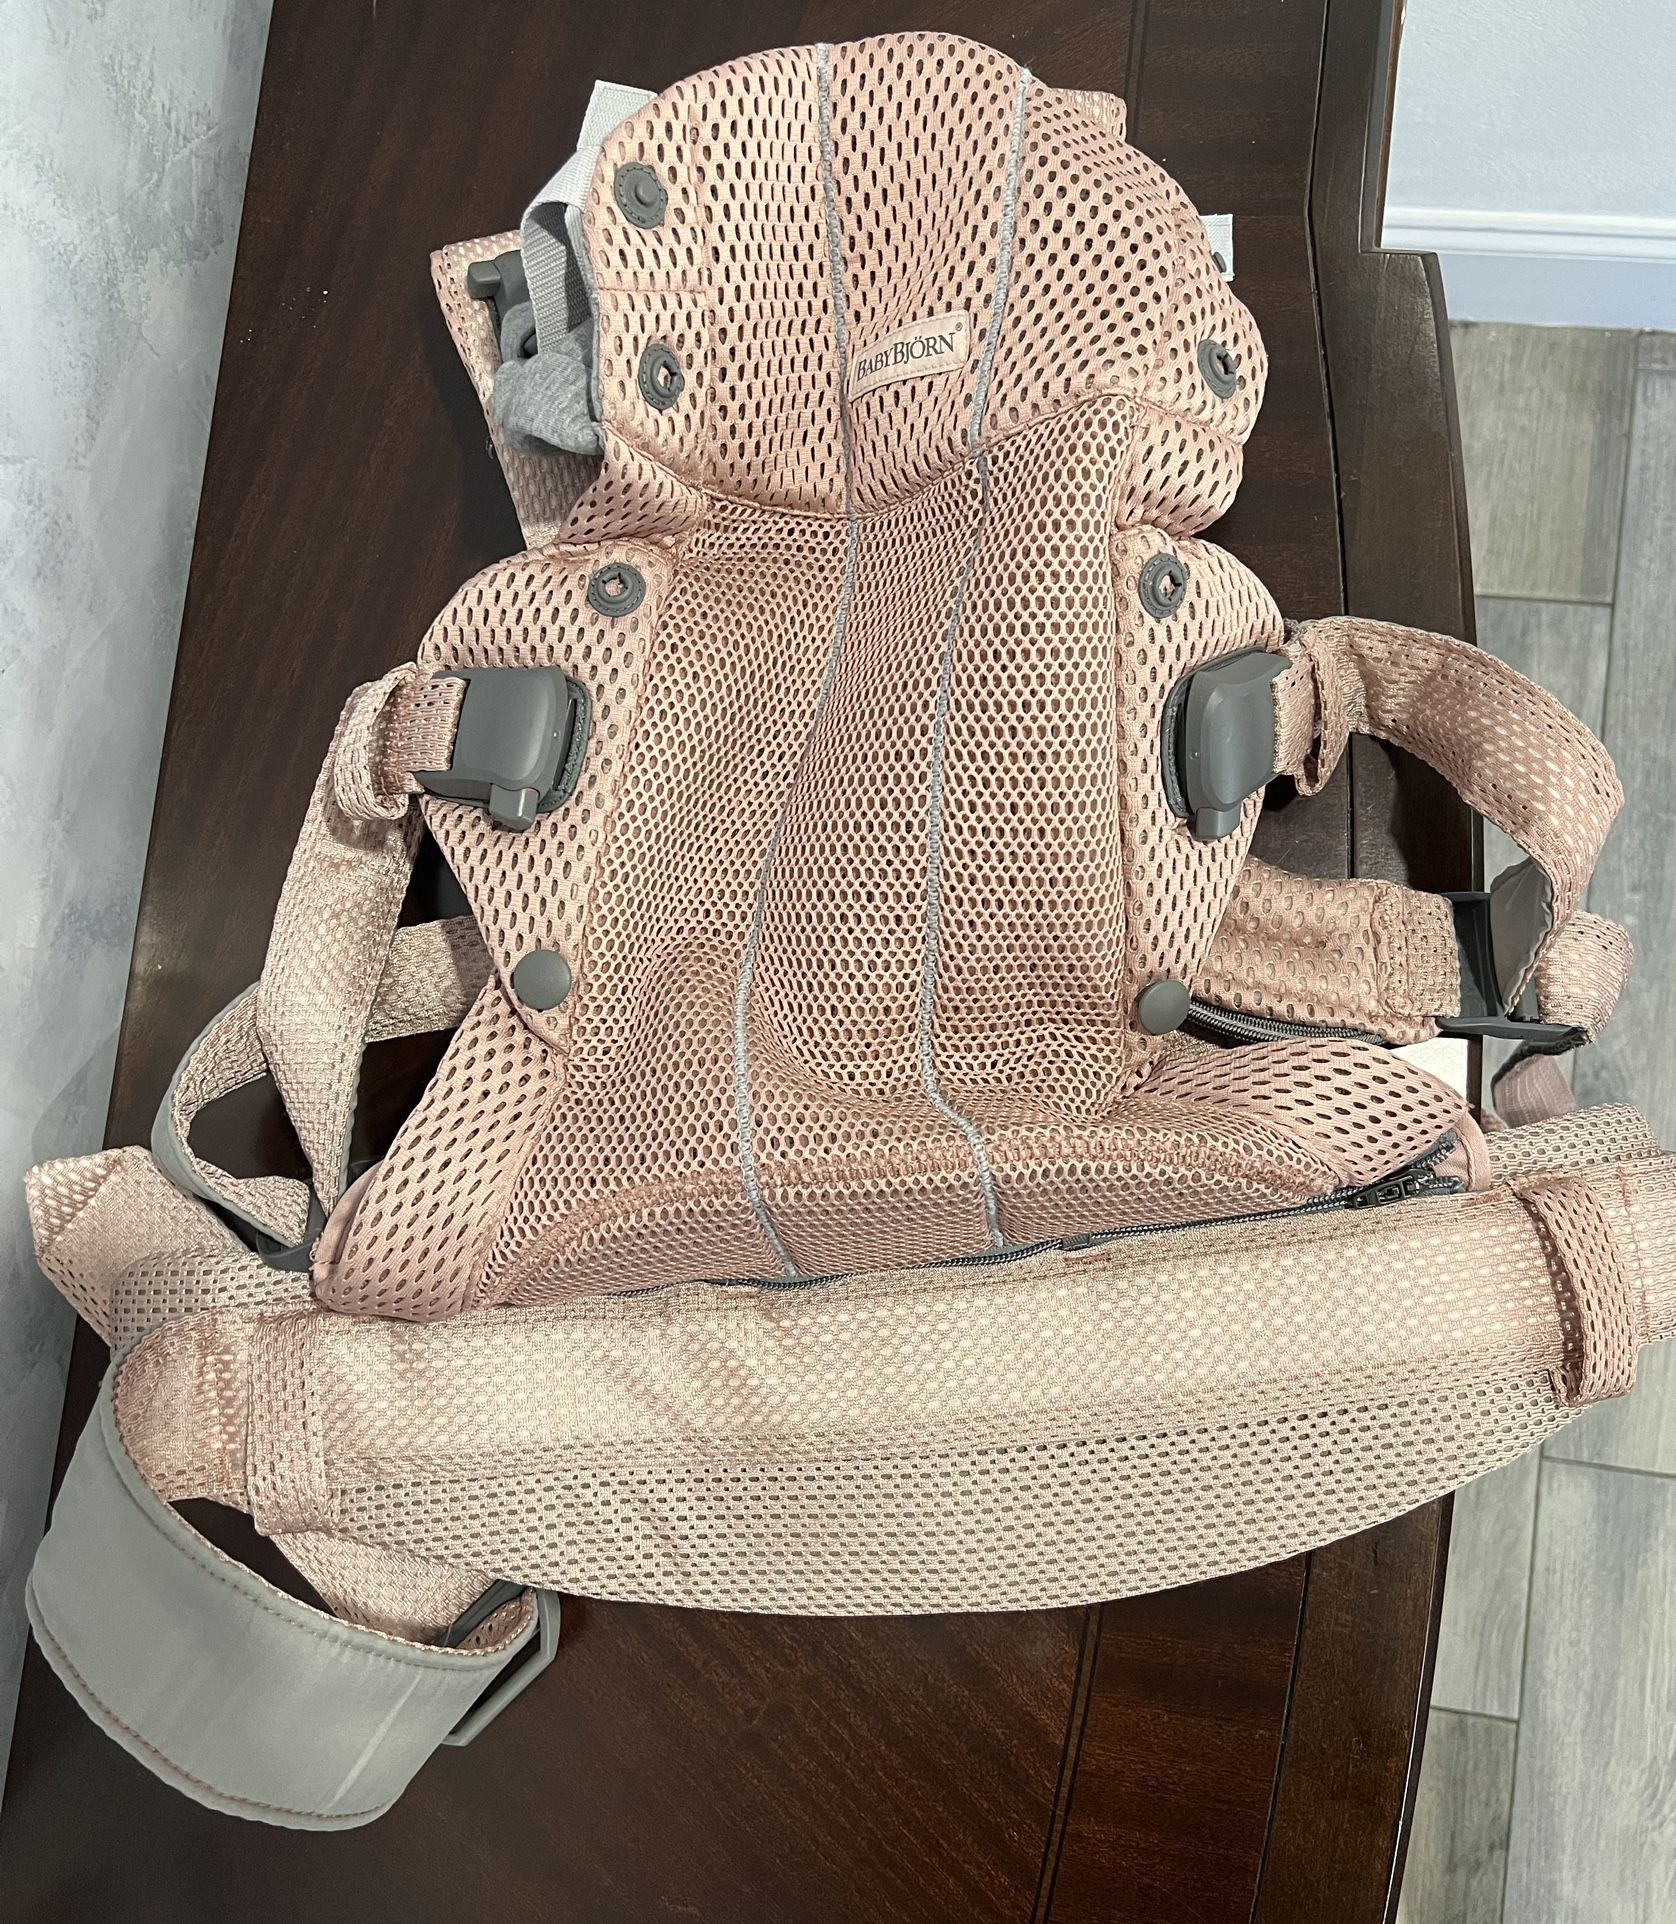 Baby Bjorn Harmony Carrier Like New Condition 